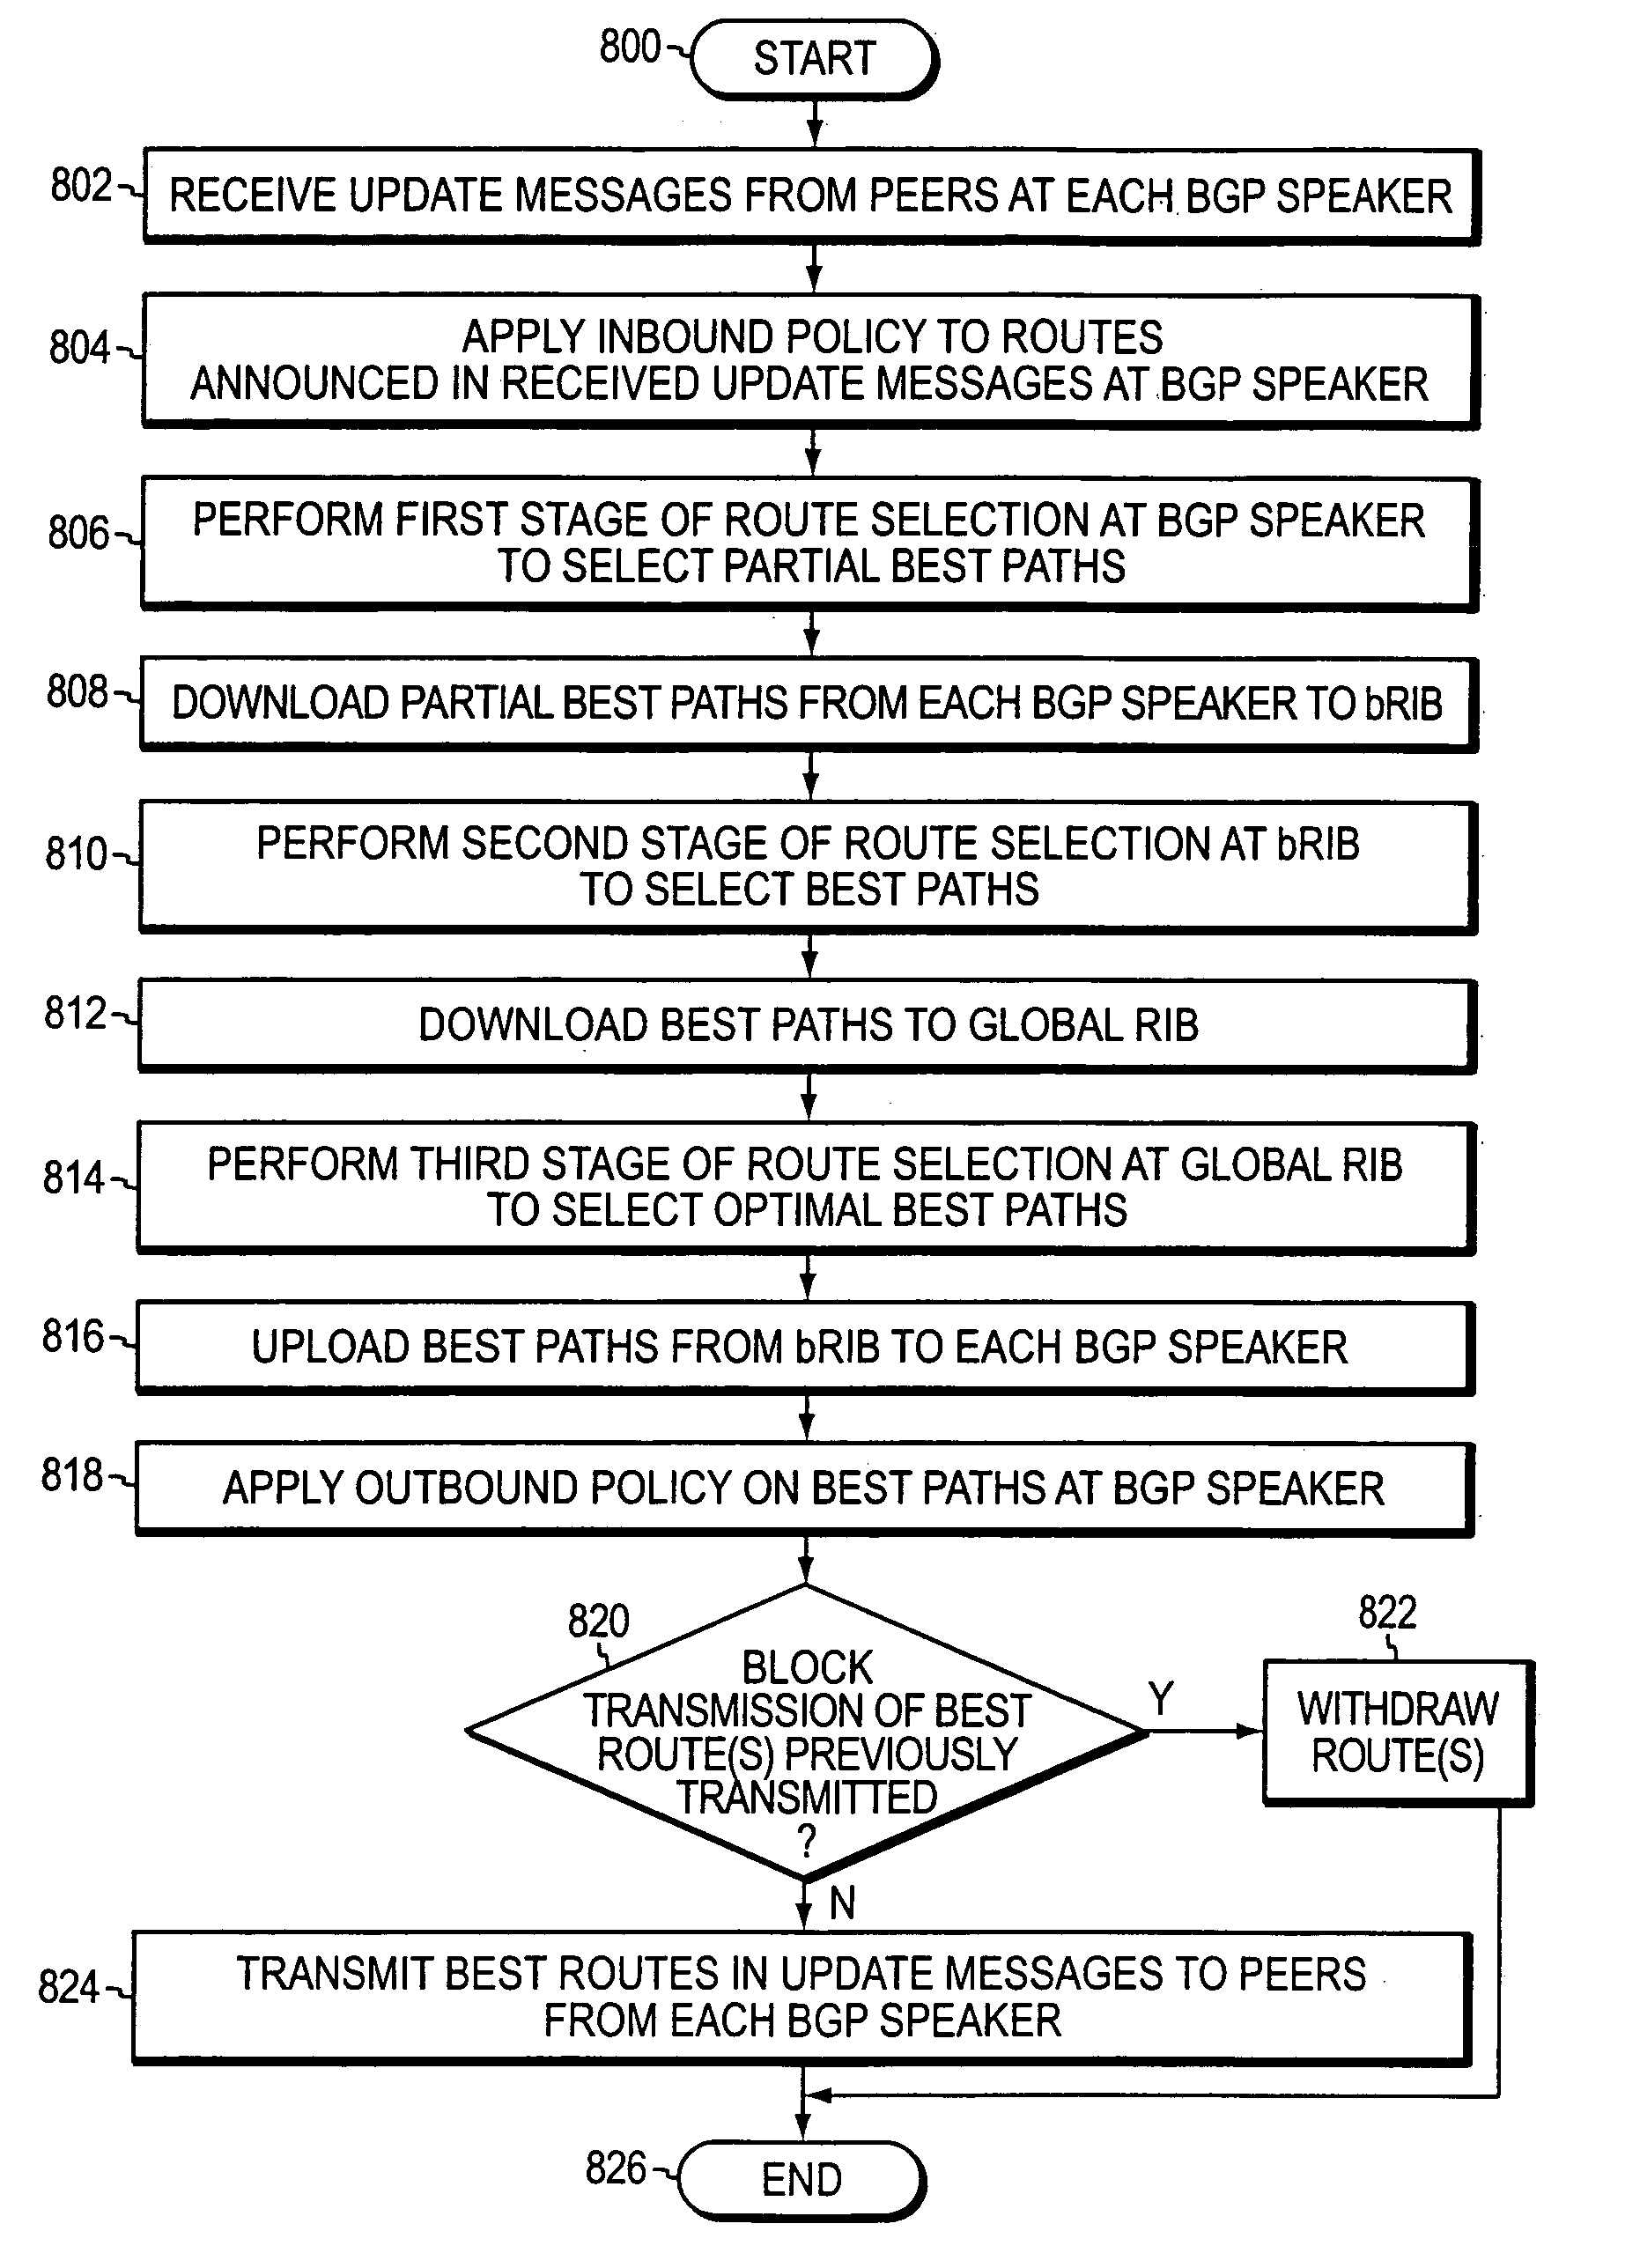 System and method for distributing route selection in an implementation of a routing protocol